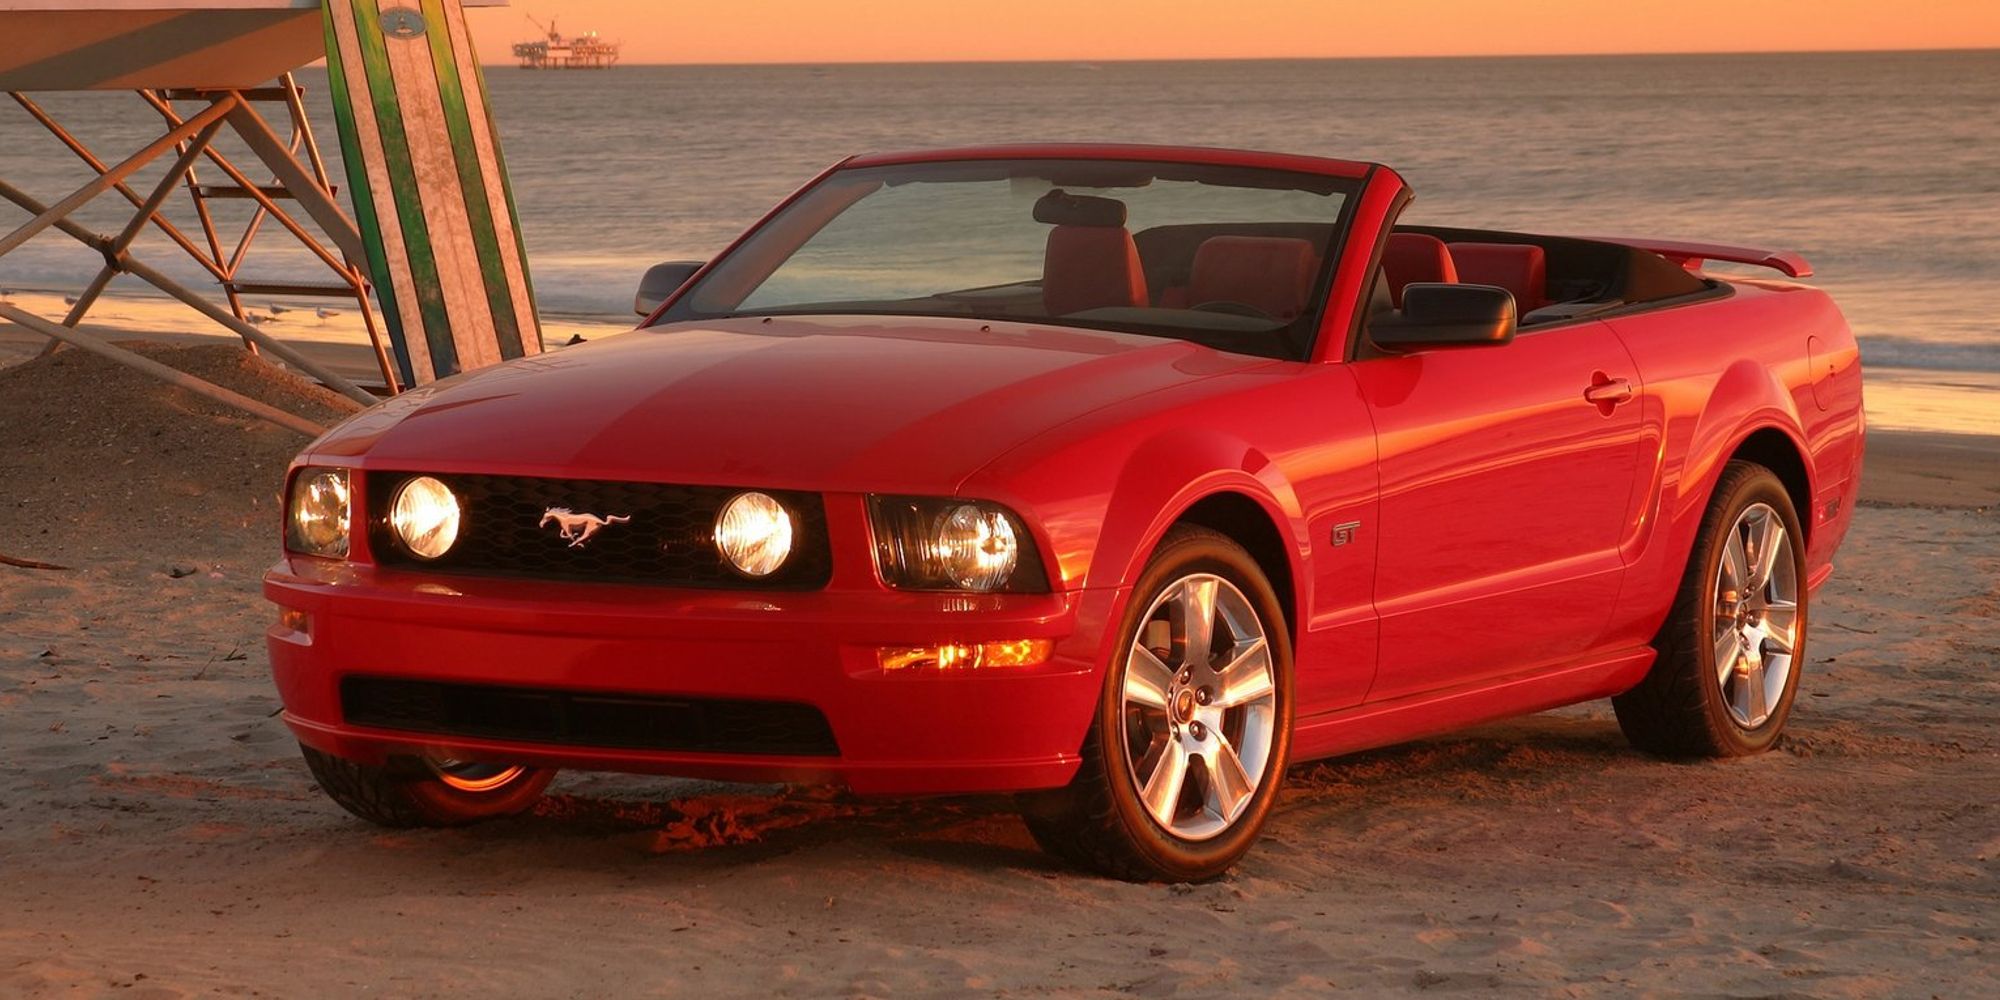 Front 3/4 view of a red S197 GT Convertible